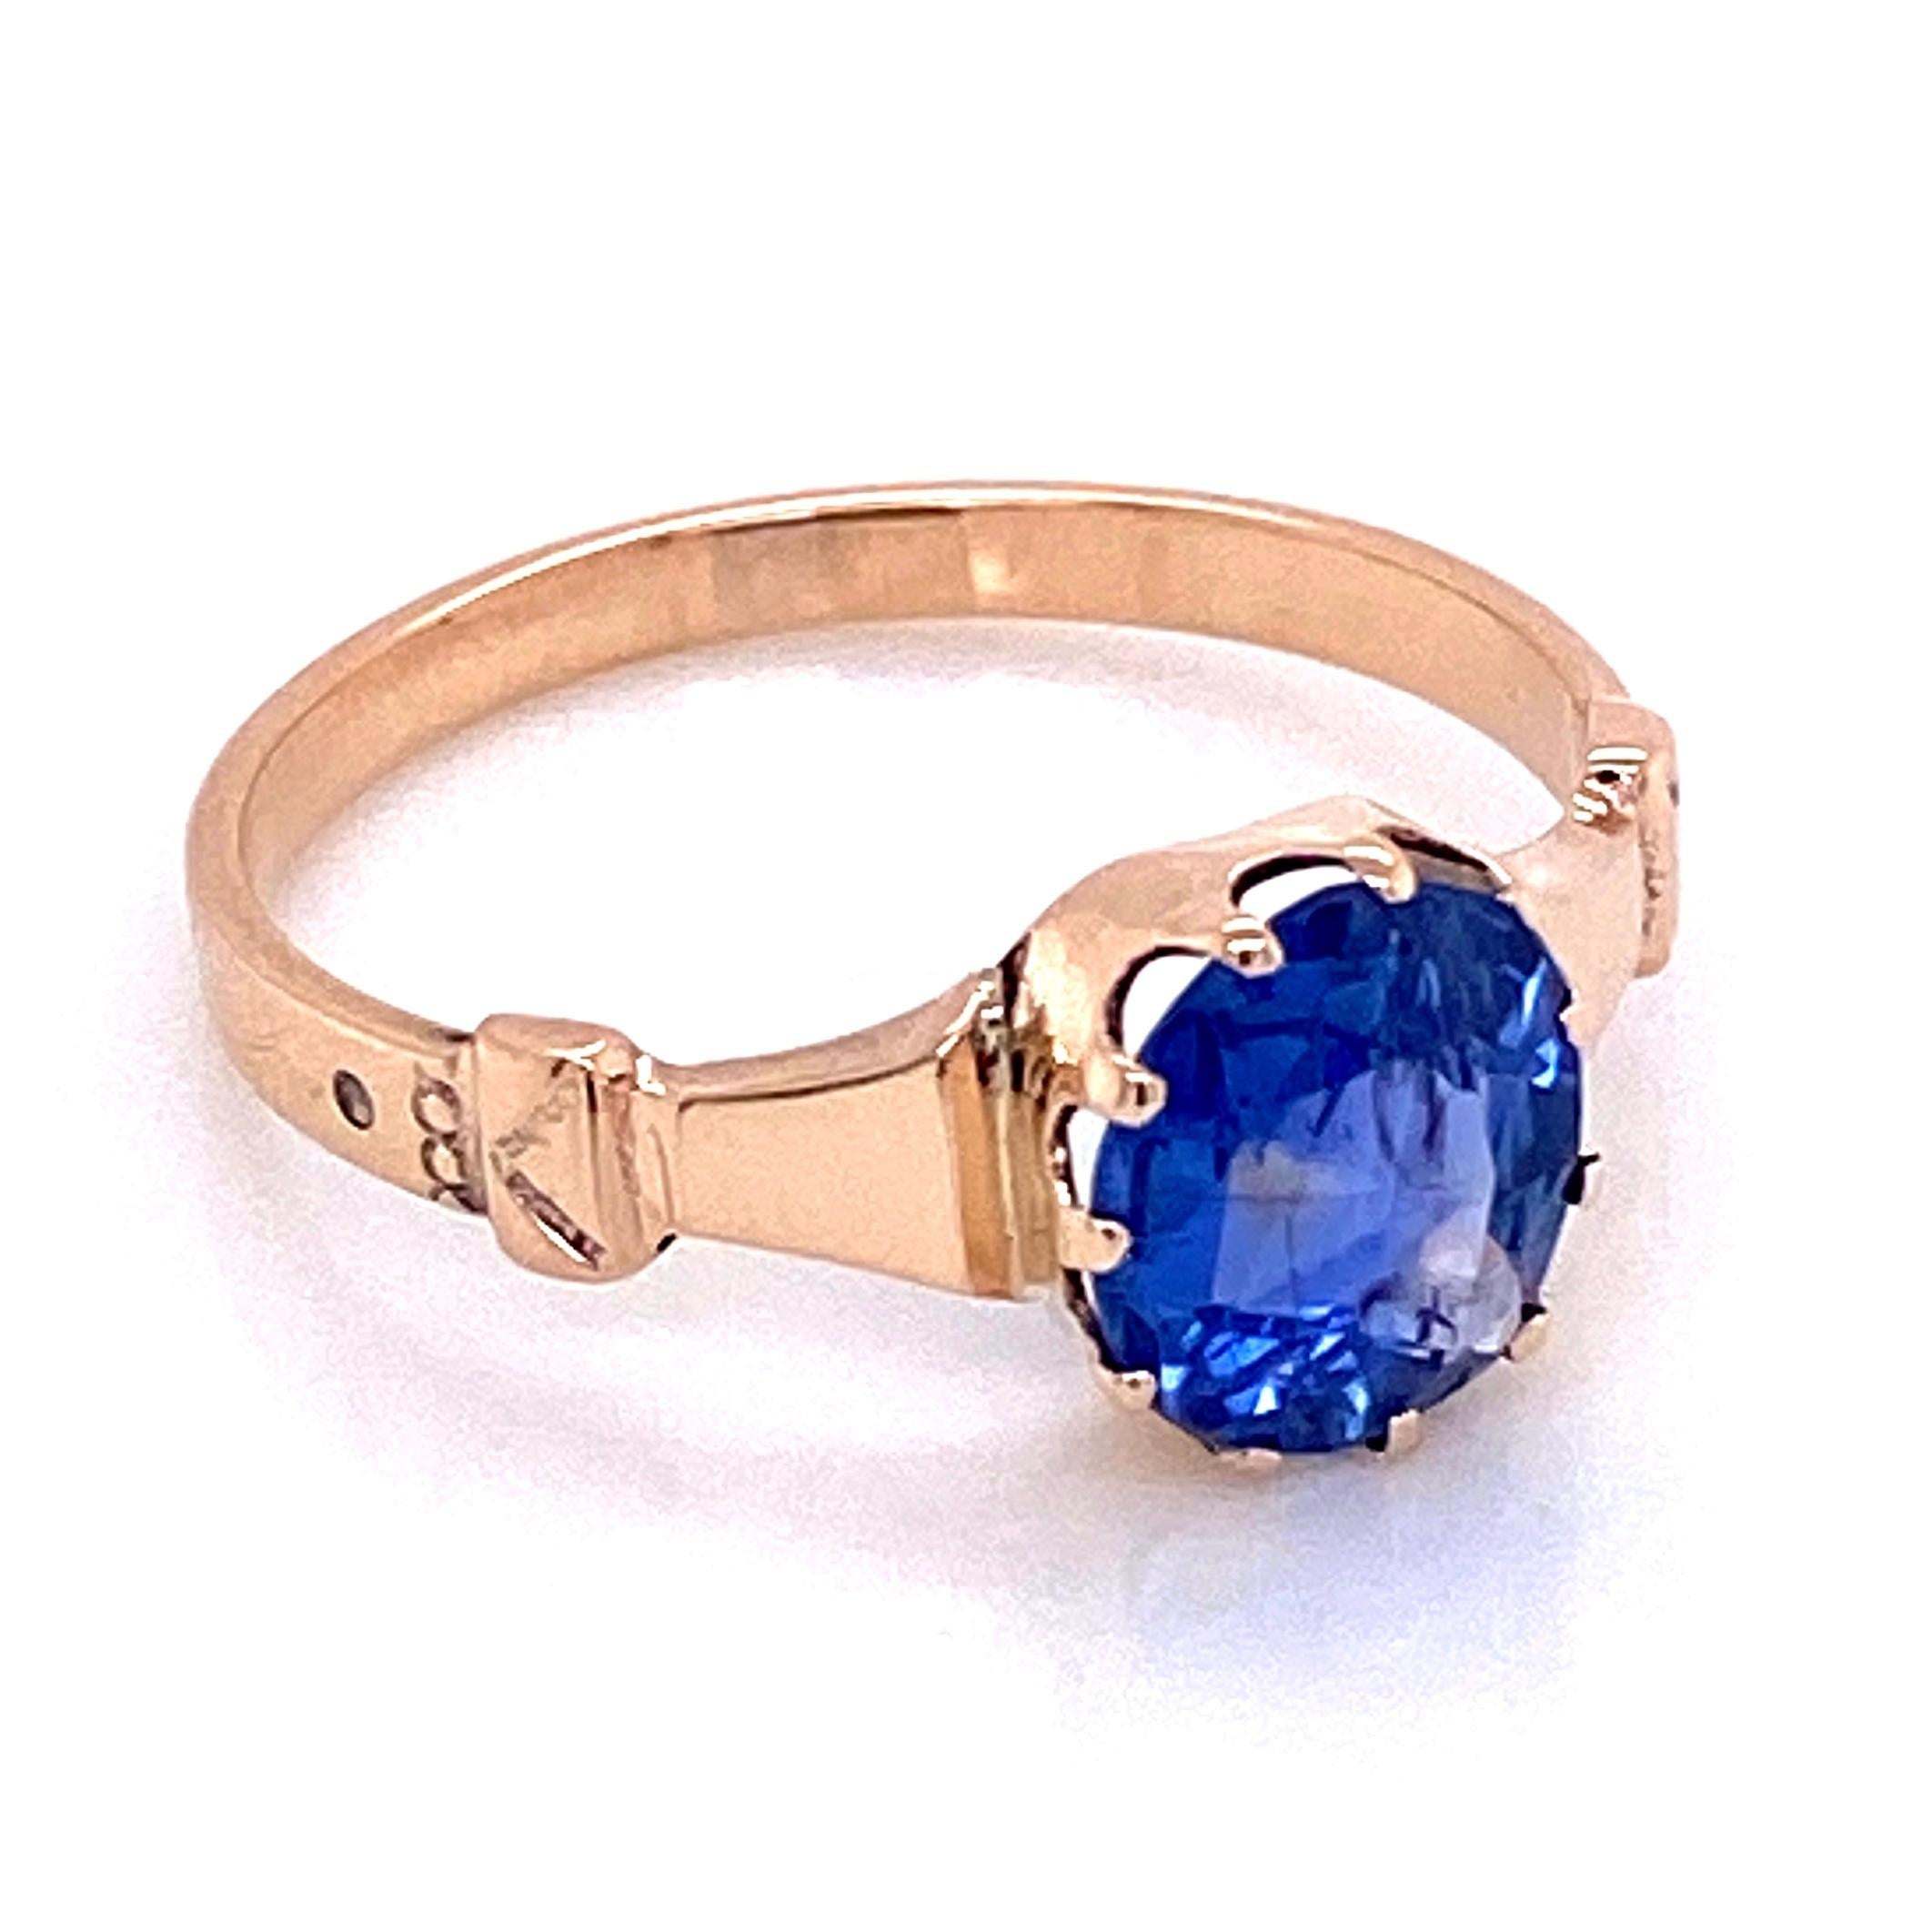 Simply Beautiful! Finely detailed Blue Sapphire Ring. Centering a securely nestled Hand set 1.51 Carat NO HEAT Blue Sapphire. The Sapphire has intact crystal inclusions indicating it has no evidence of heat treatment. Hand crafted 9 Carat yellow